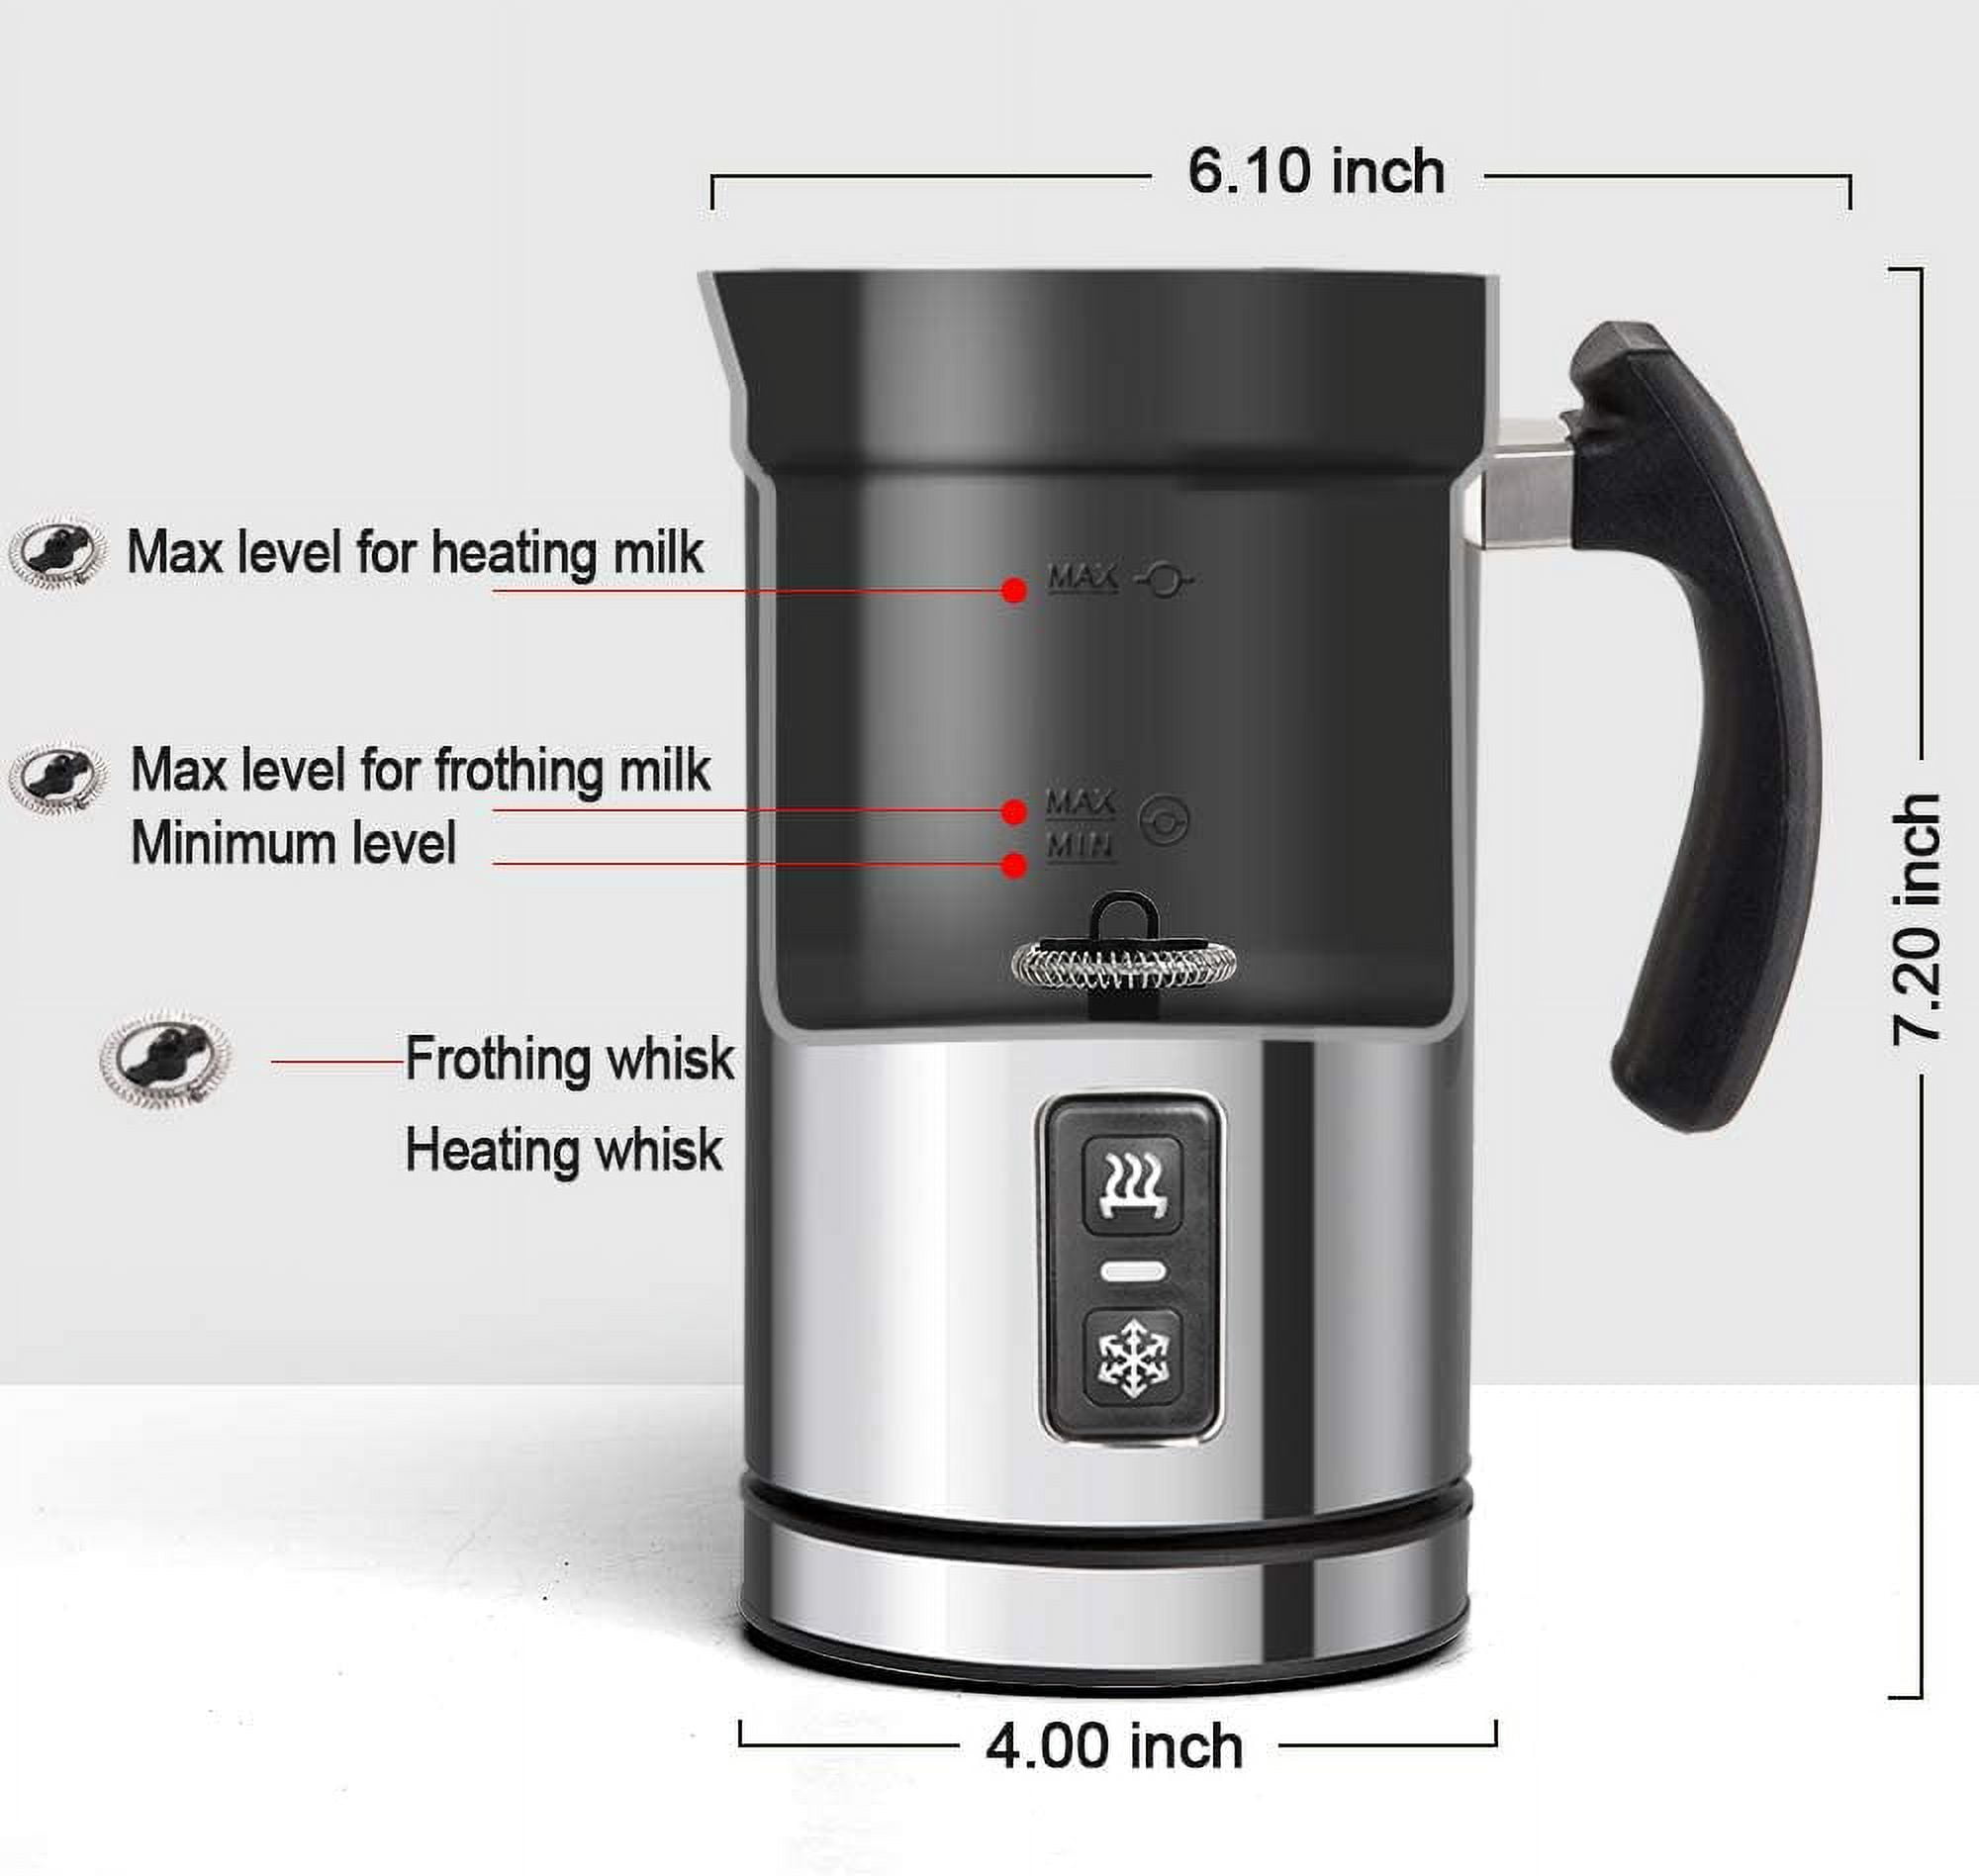 Secura Detachable Milk Frother, 17oz Electric Milk Steamer Stainless Steel,  Automatic Hot/Cold Foam and Hot Chocolate Maker with 2 in 1 Function